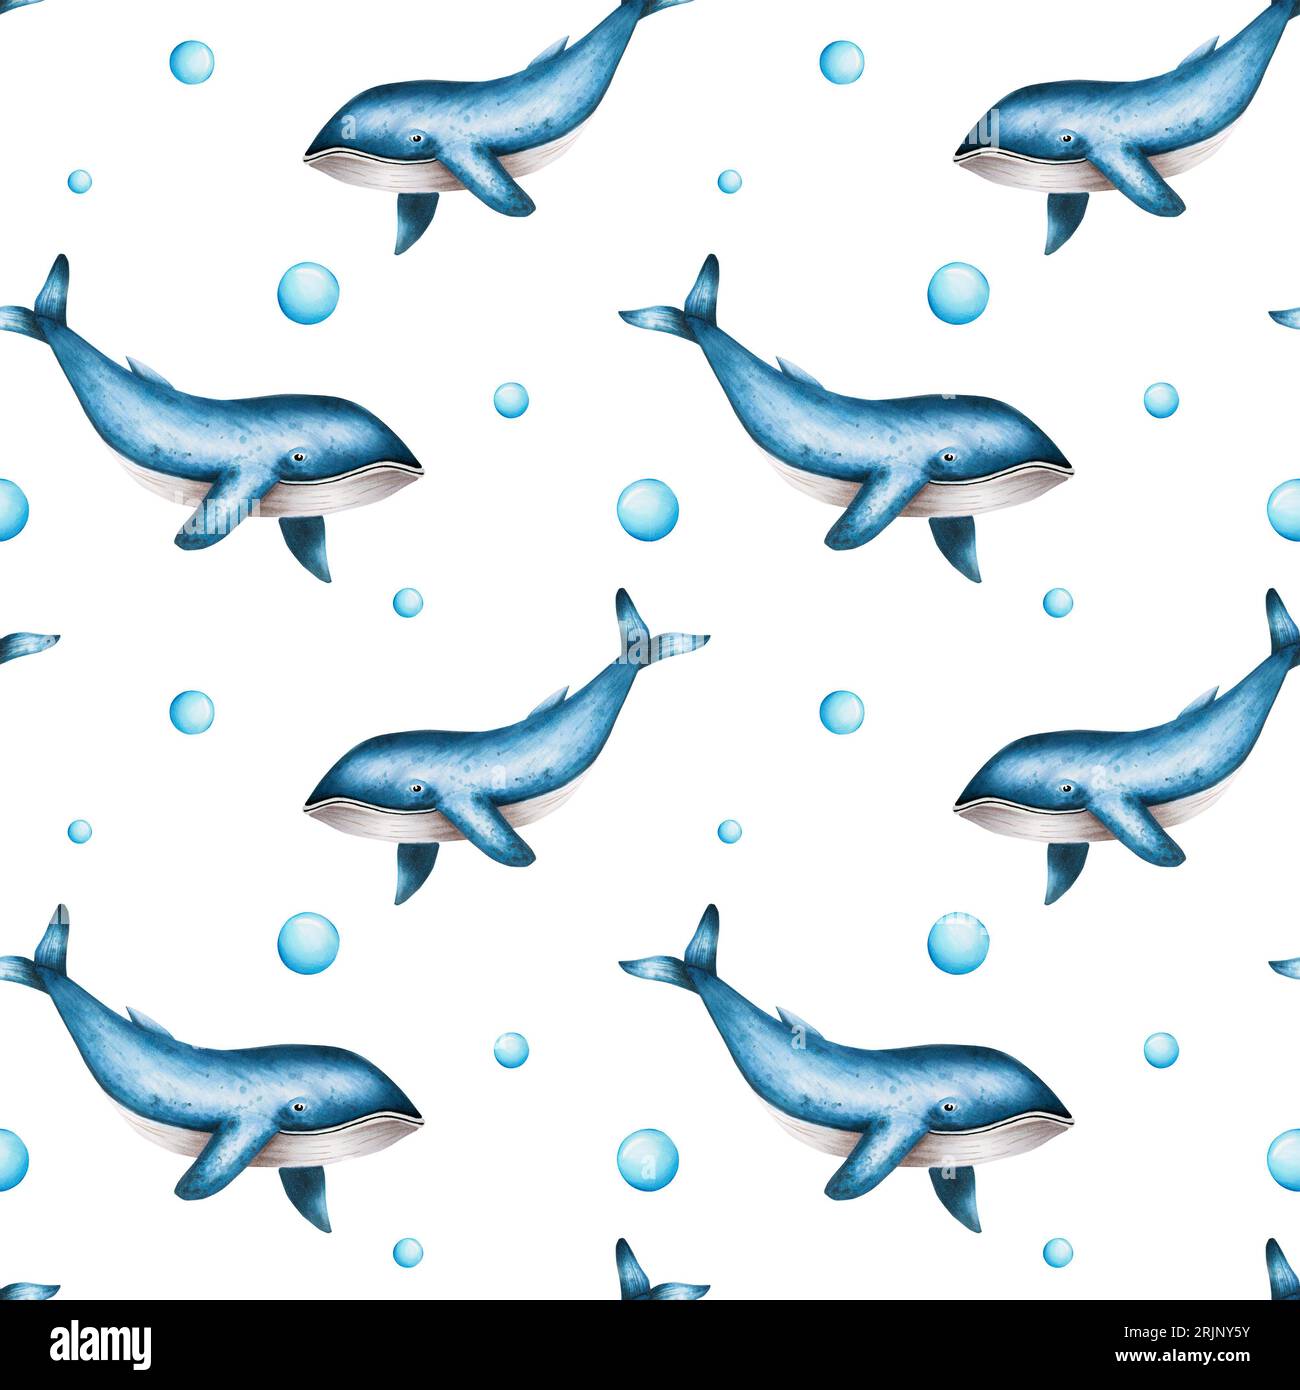 Watercolor seamless pattern with blue whales isolated on white background. Hand painting realistic Arctic and Antarctic ocean mammals. For designers Stock Photo